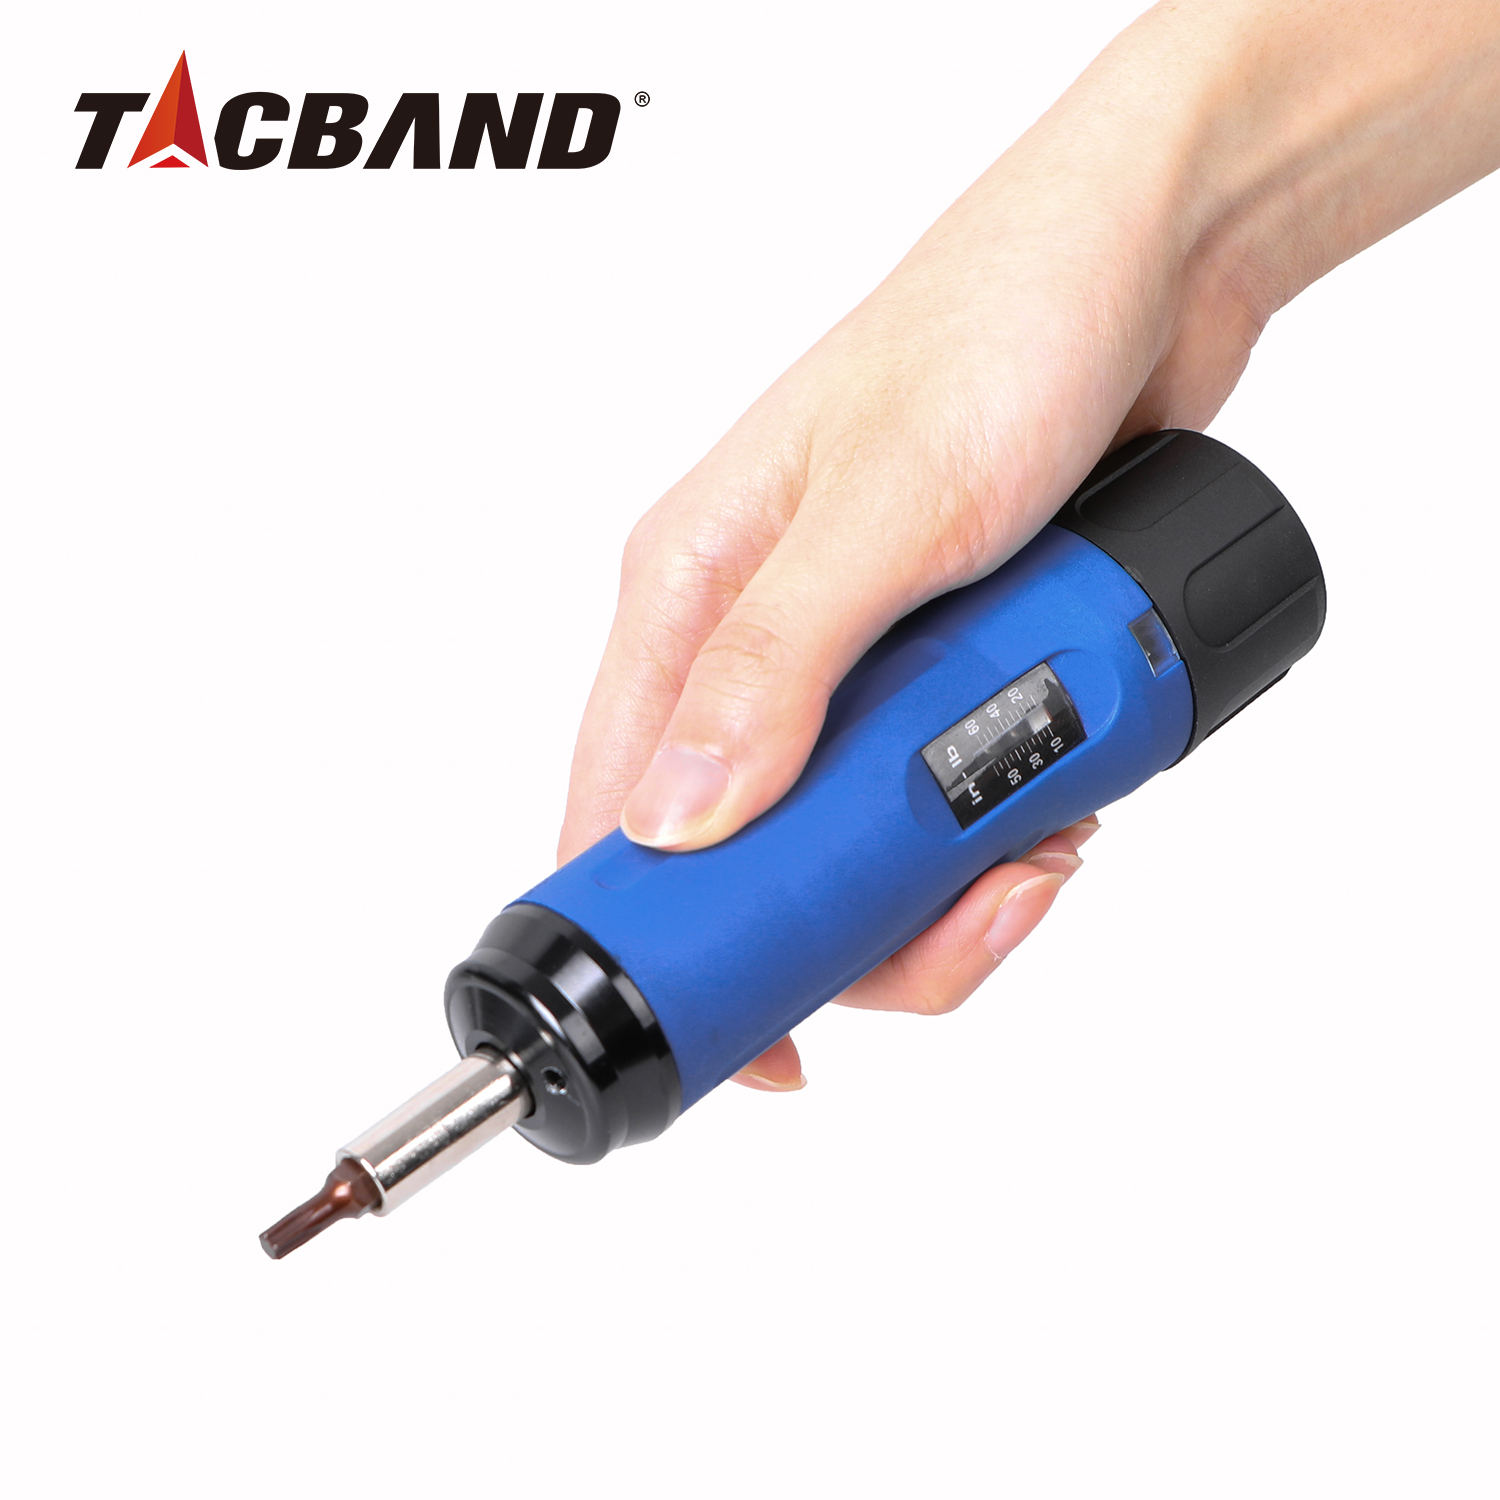 What to Consider When Purchasing A Gunsmith Torque Wrench?